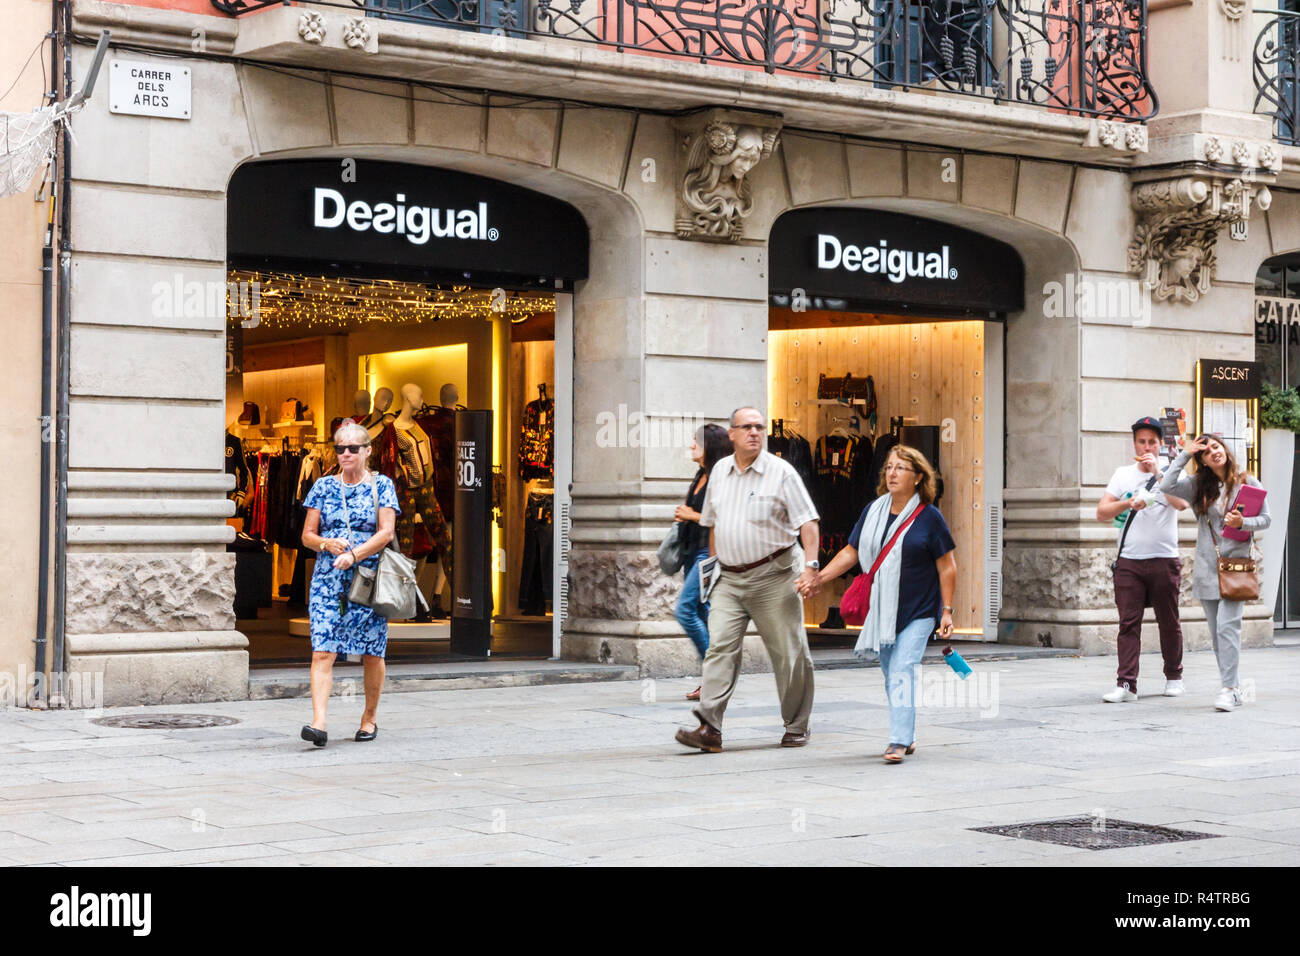 Barcelona, Spain - 4th October 2017: People walking past the Desigual store. The brand is headquartered in the city. Stock Photo